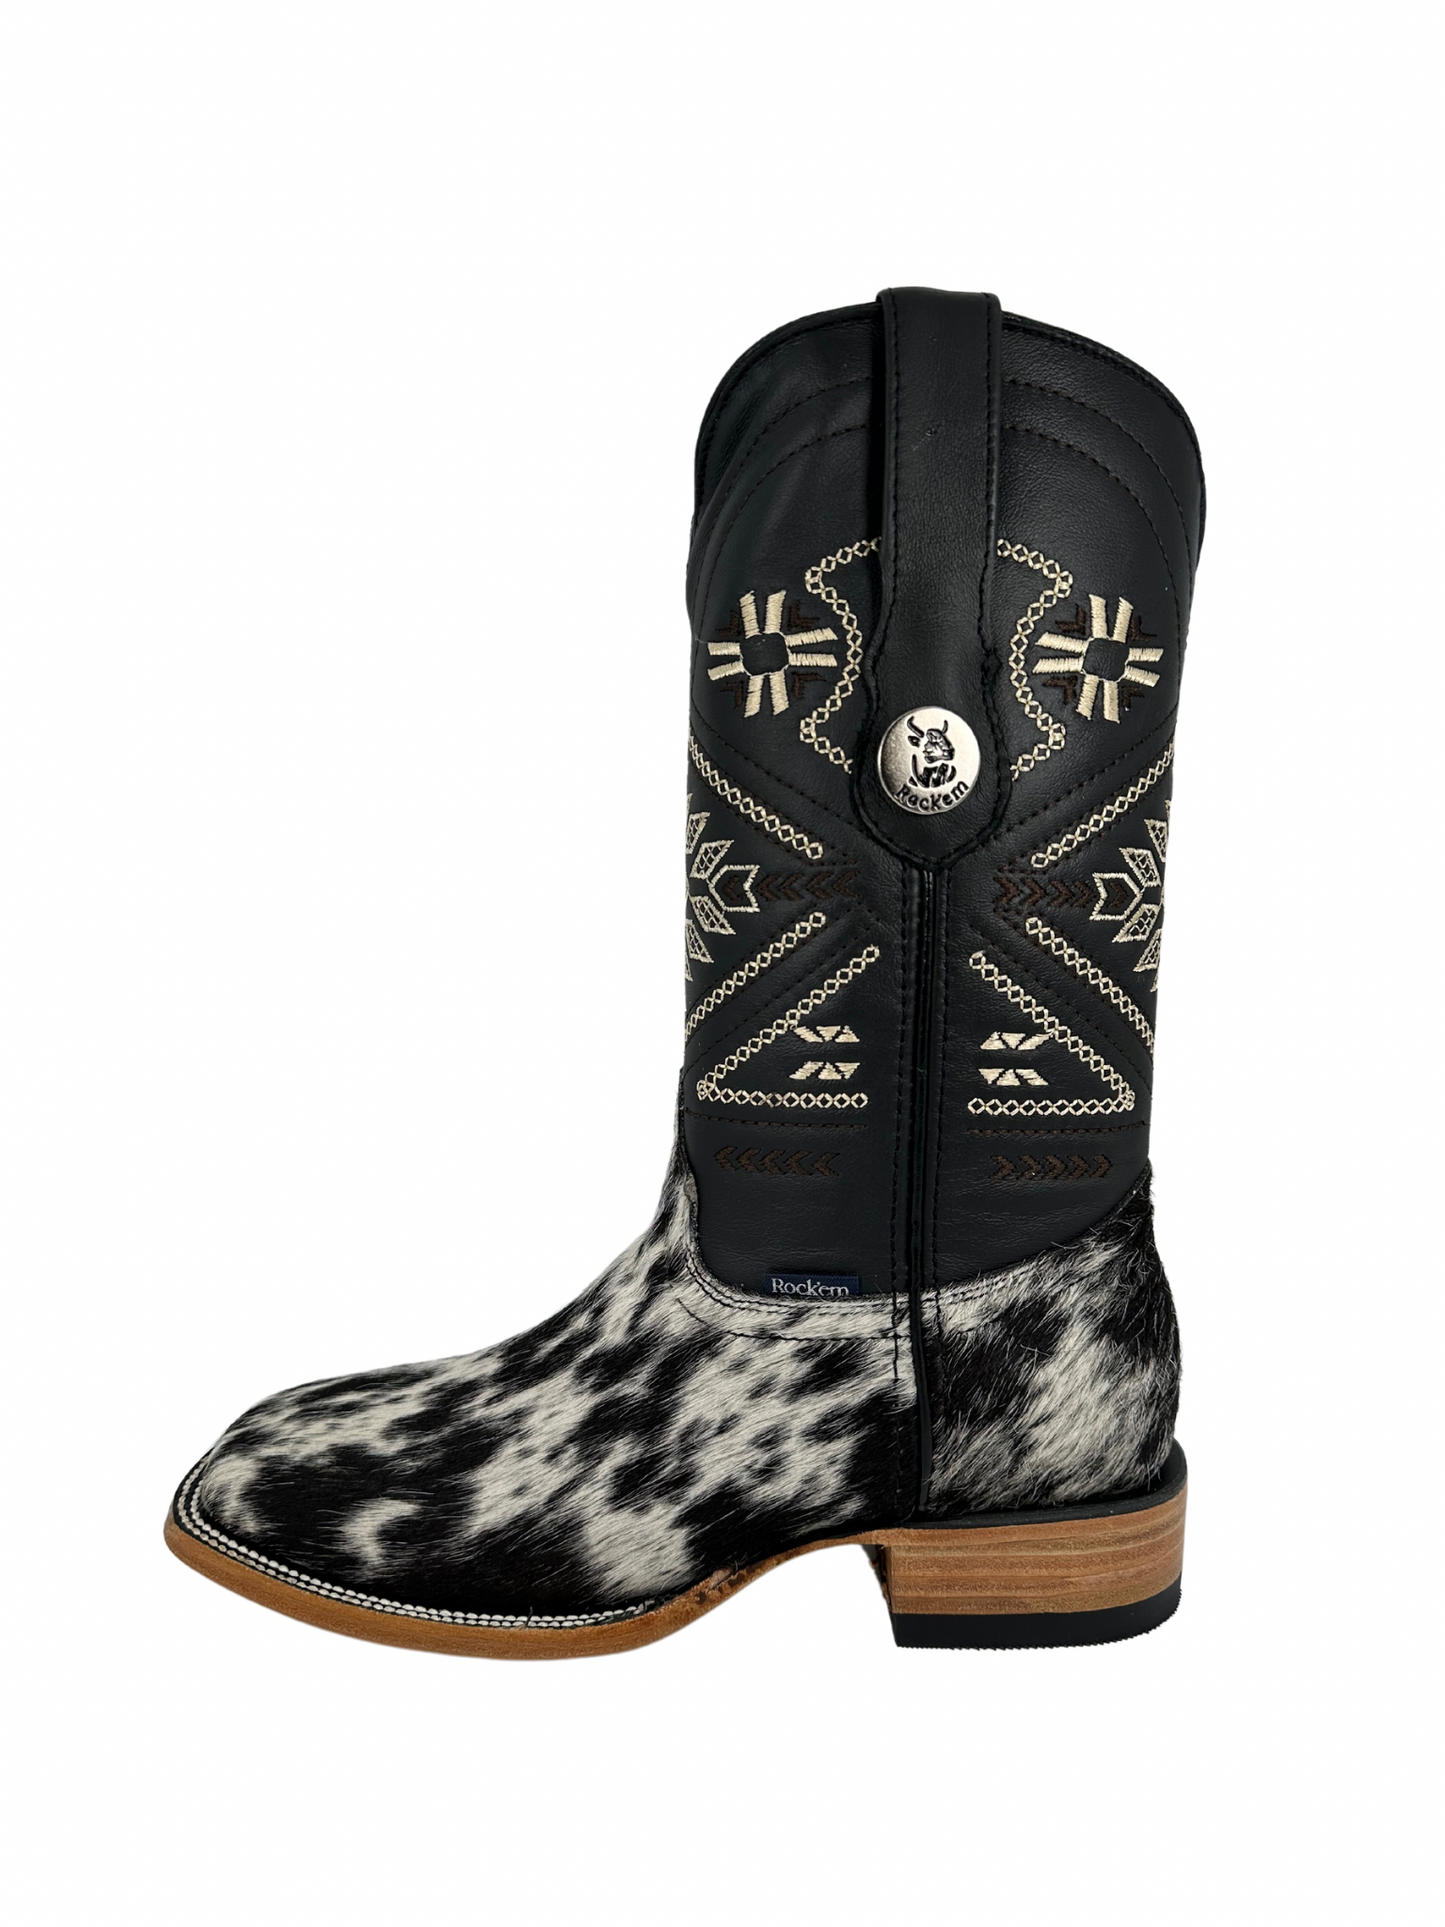 Rock'em Women's Cow Hair Boots Size: 6.5 *AS SEEN ON IMAGE*